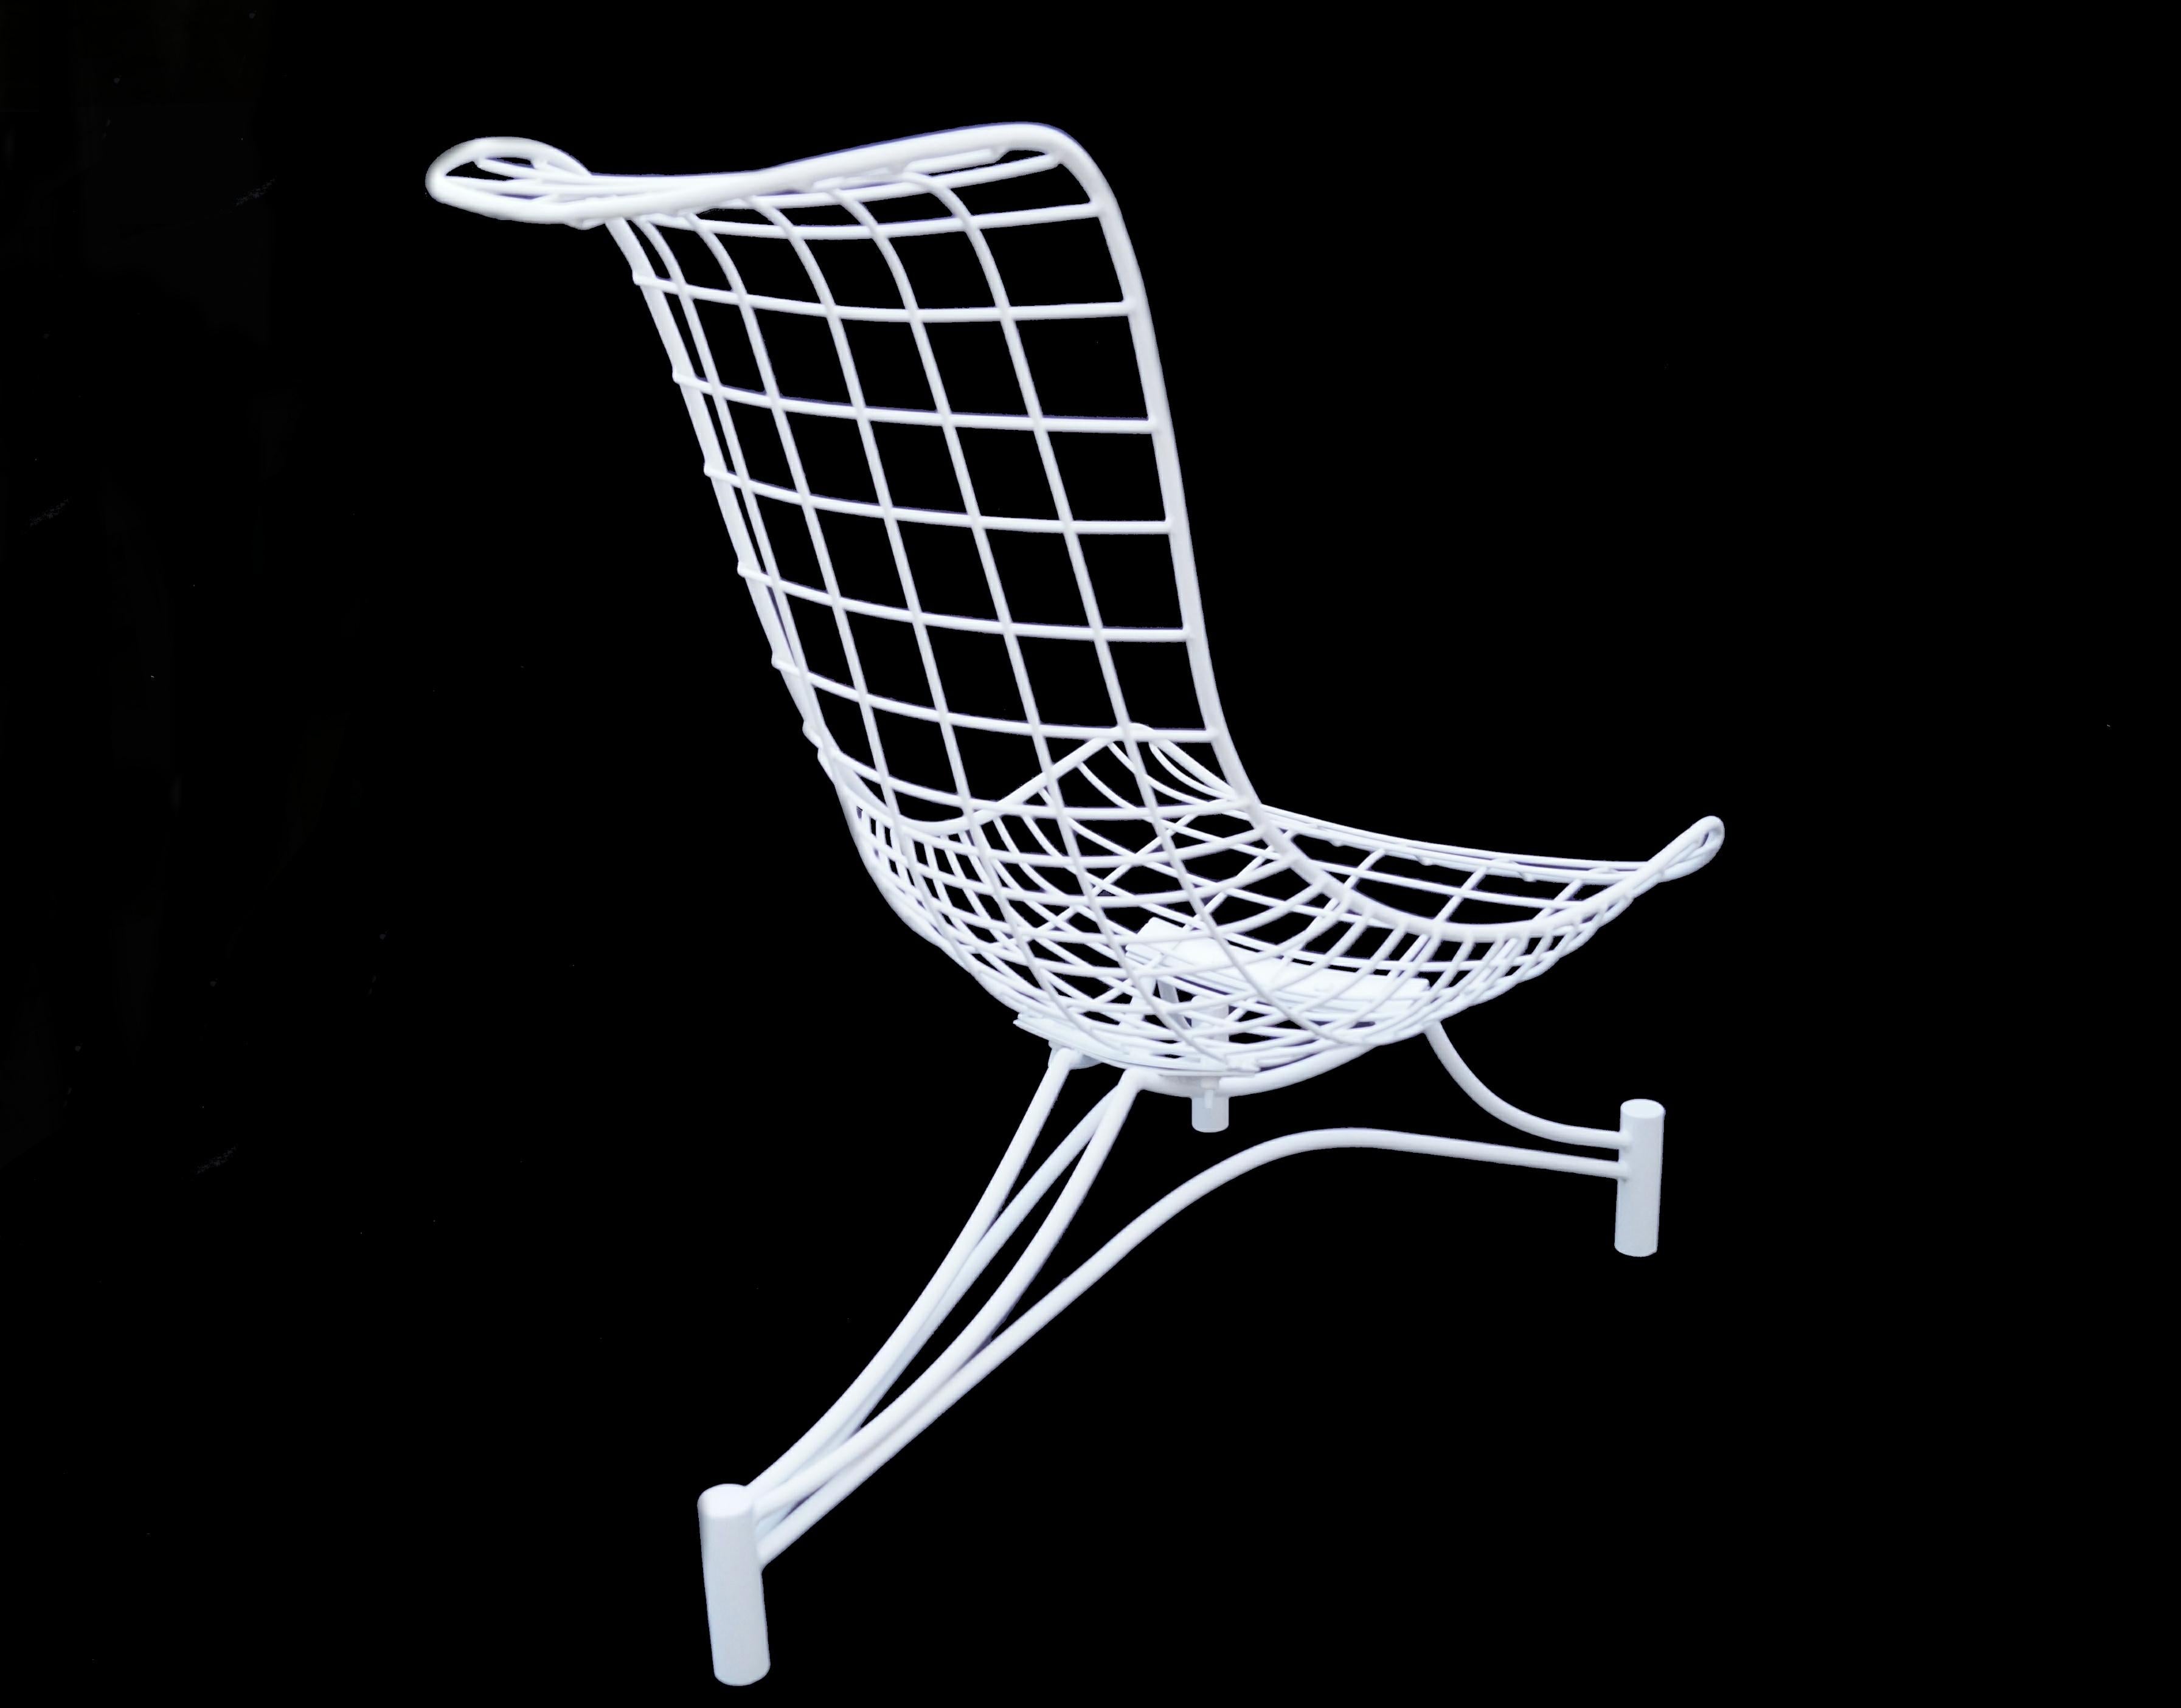 Vladimir Kagan Capricorn series indoor outdoor lounge chair.
If you are in the New Jersey , New York City Metro Area , please contact us with your delivery zipcode, as we may be able to deliver curbside for less than the calculated White Glove rates